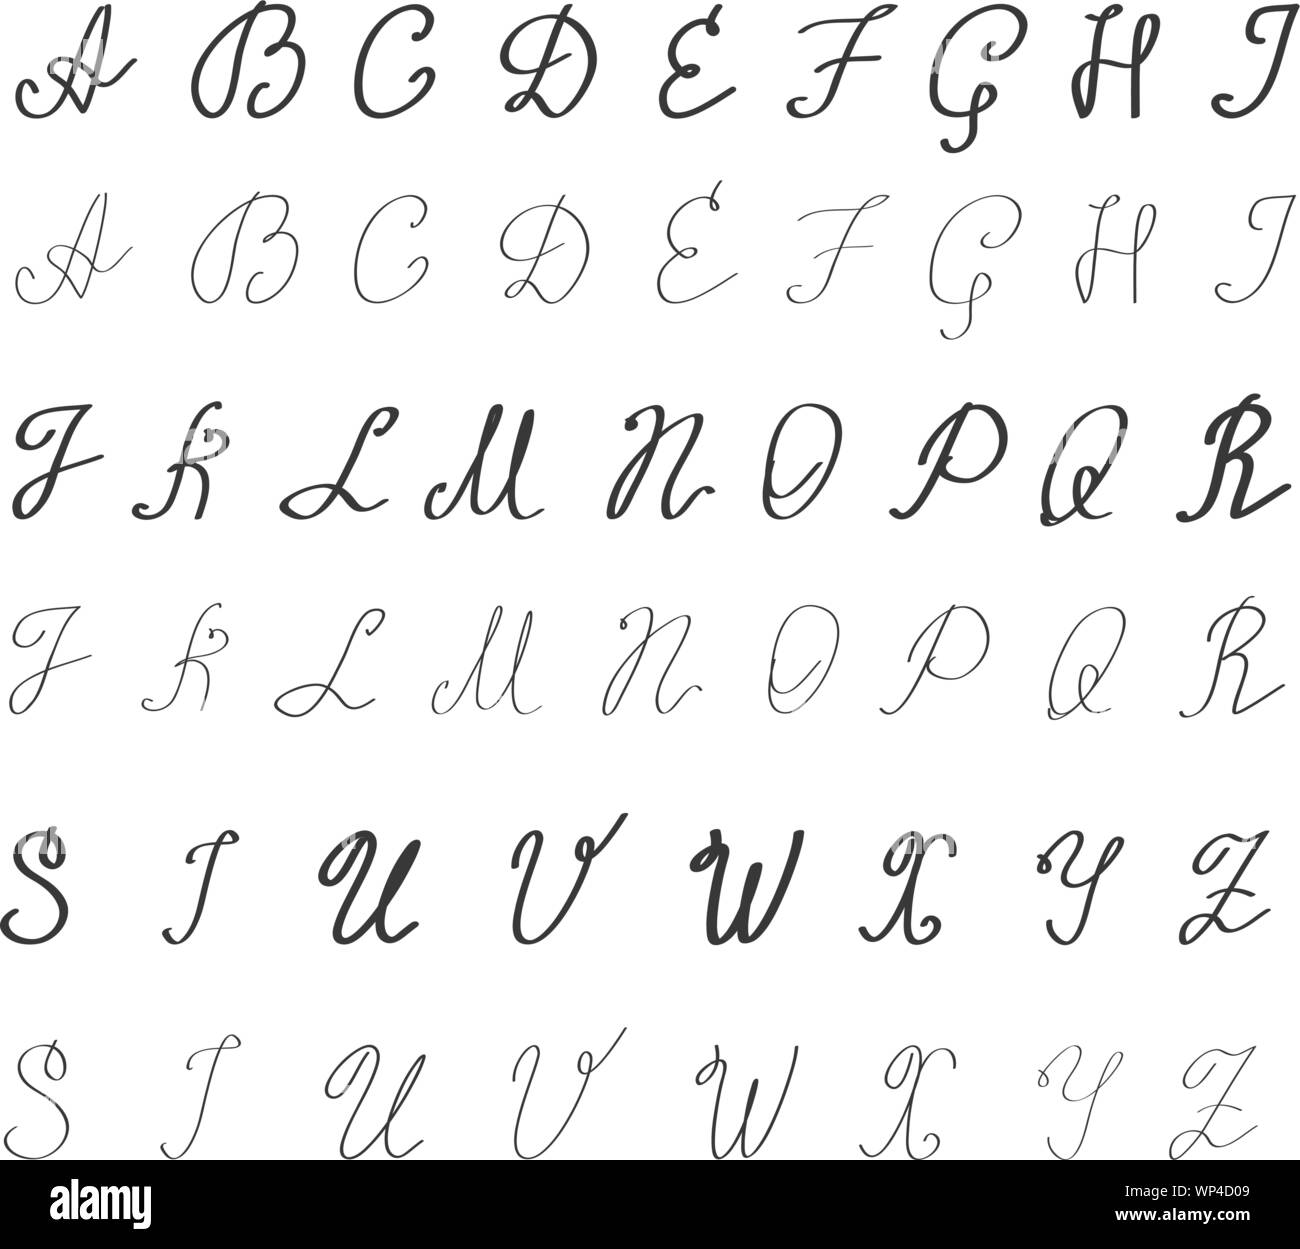 Featured image of post Calligraphy Writing Styles In English Alphabets - You may be surprised at ready to learn how to write in gothic calligraphy?